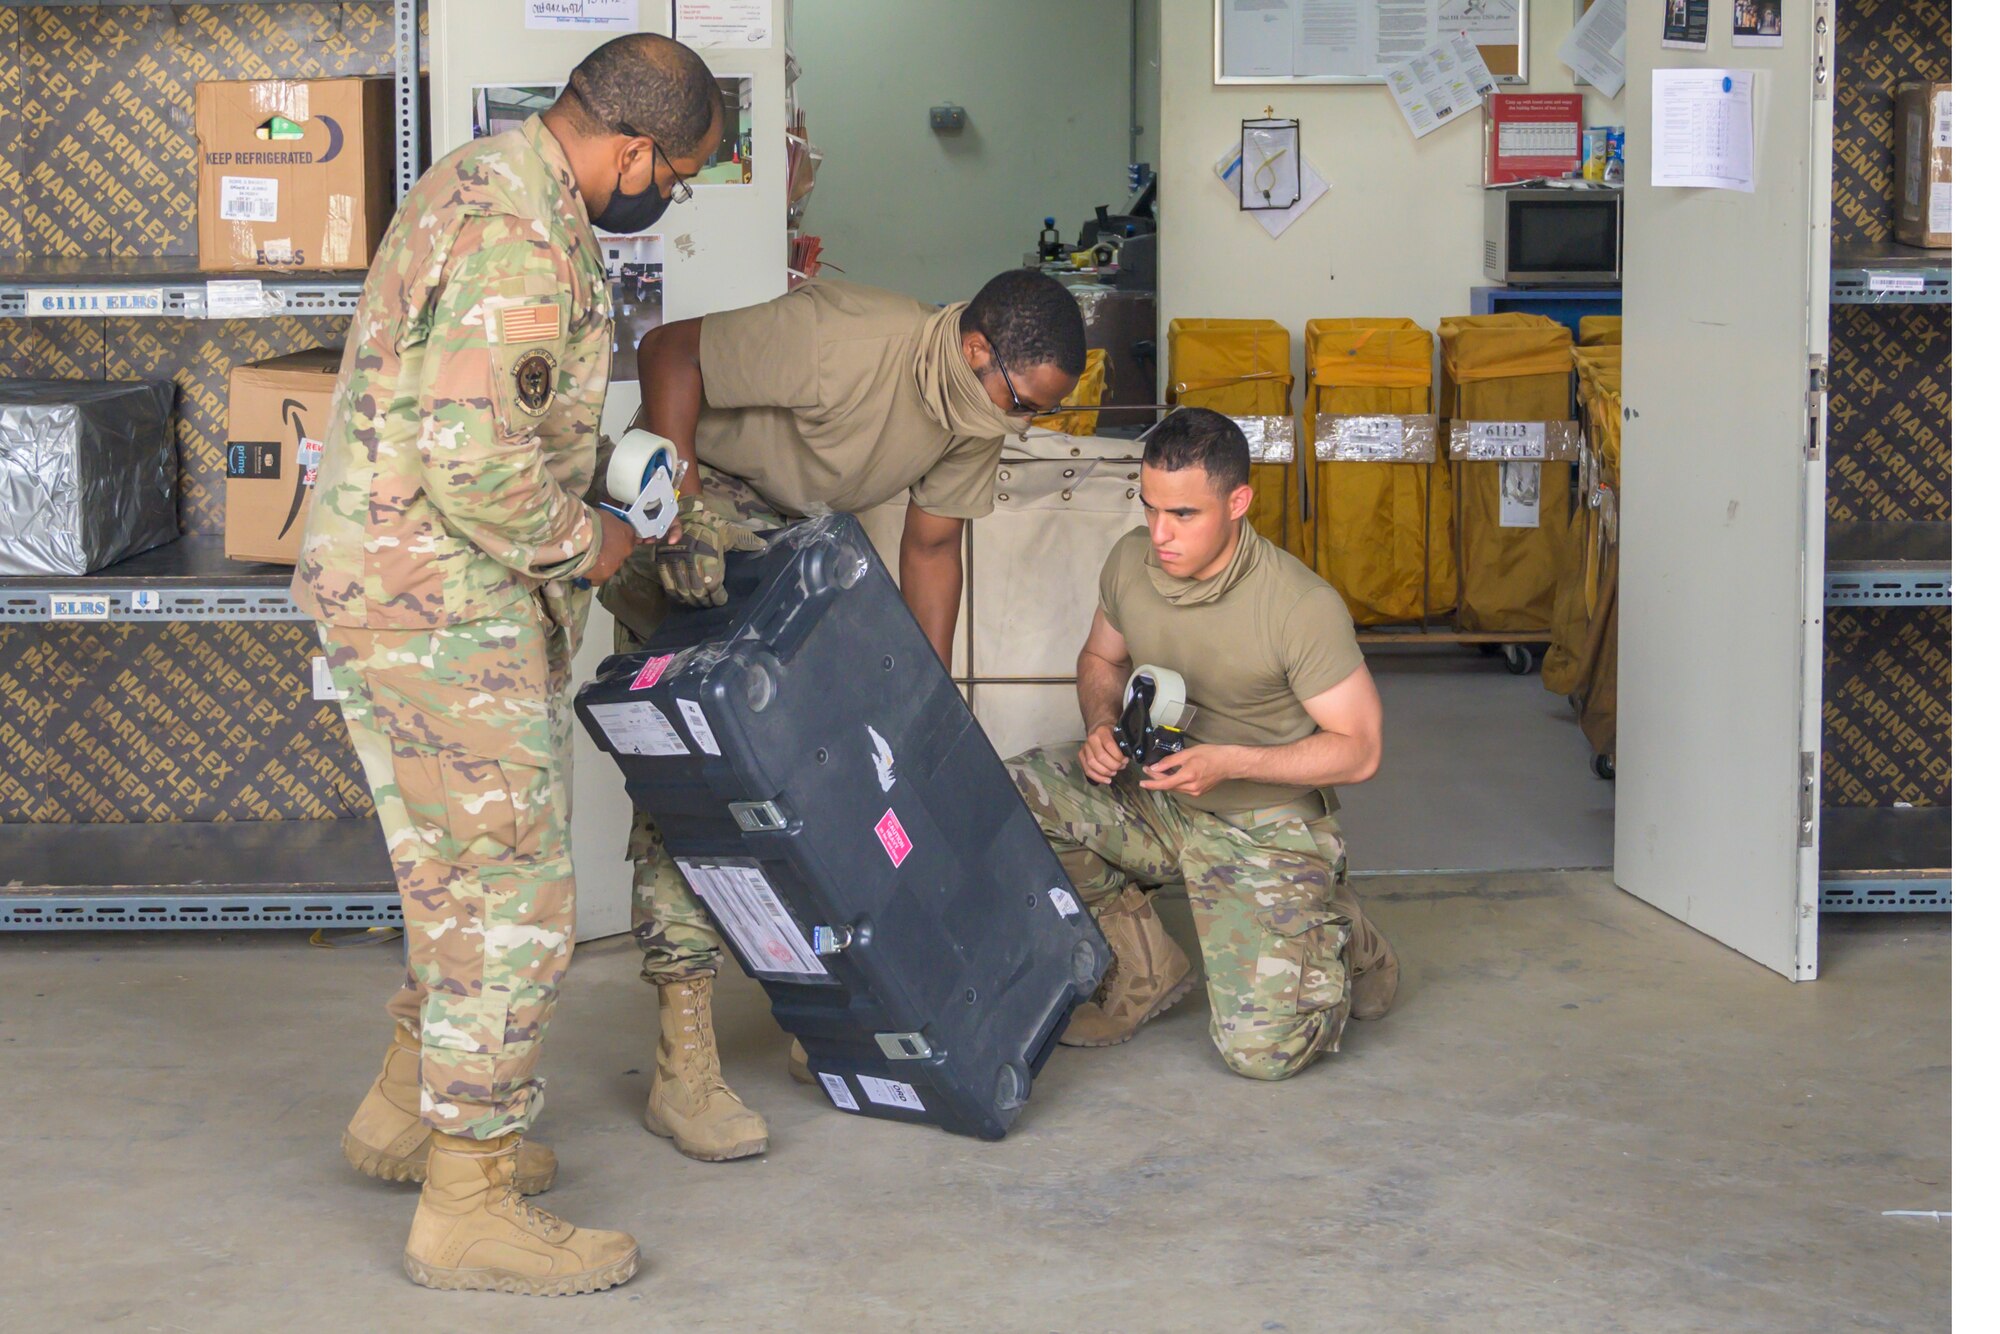 U.S. Air Force Airmen from the 380th Expeditionary Force Support Squadron, sort mail packages at Al Dhafra Air Base (ADAB), United Arab Emirates, June 16, 2021. The ADAB post office averages 52,000 lbs across 8,500 packages a month.